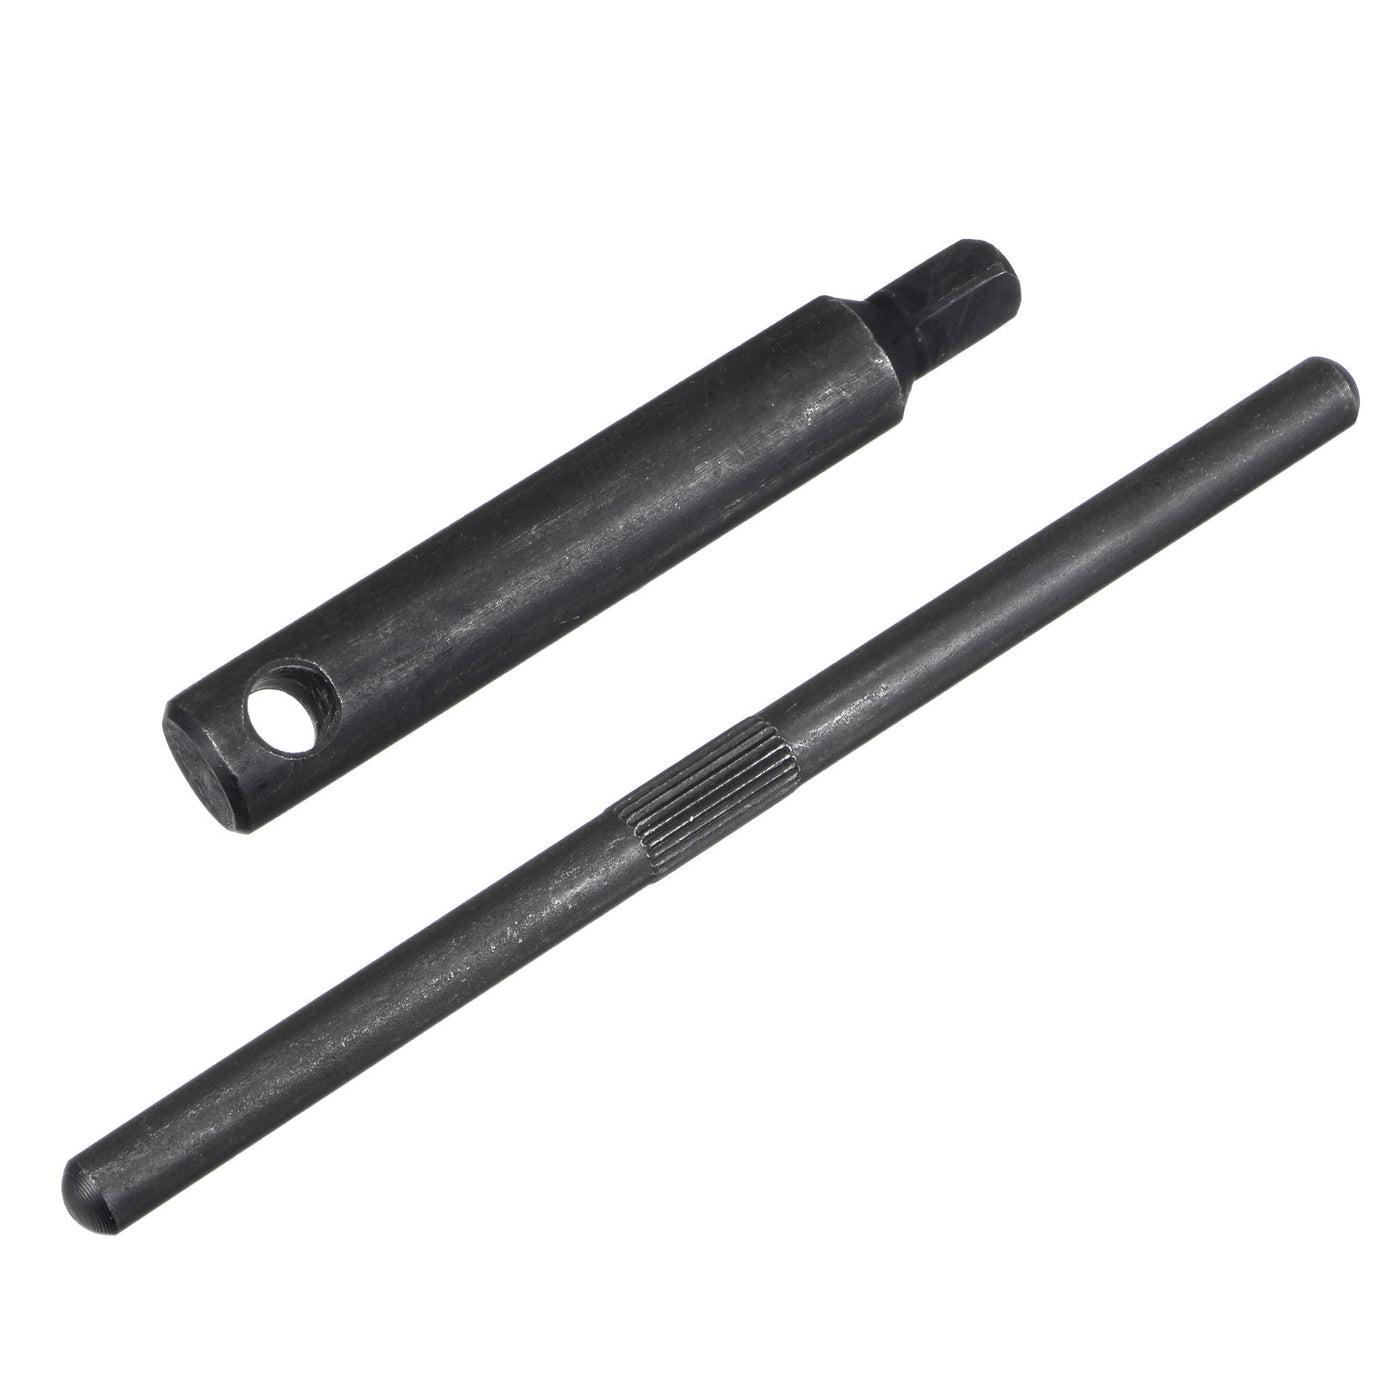 Uxcell Uxcell Lathe Chuck Wrench, 12mm Square Head Key Spanner Tool, 2 Pcs (L200x220mm)